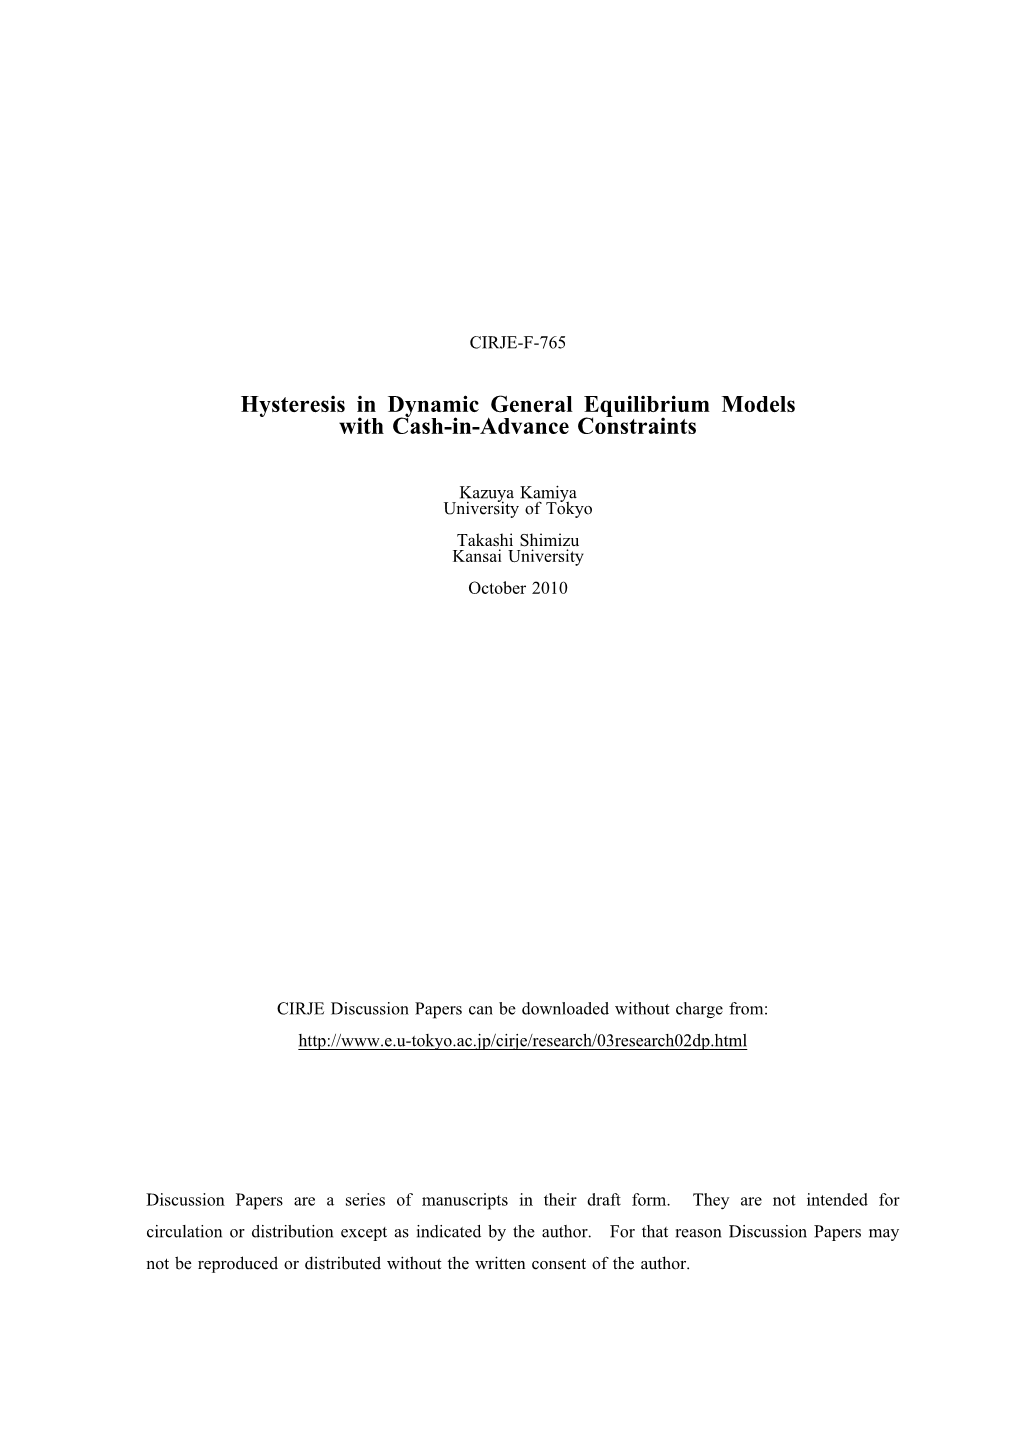 Hysteresis in Dynamic General Equilibrium Models with Cash-In-Advance Constraints